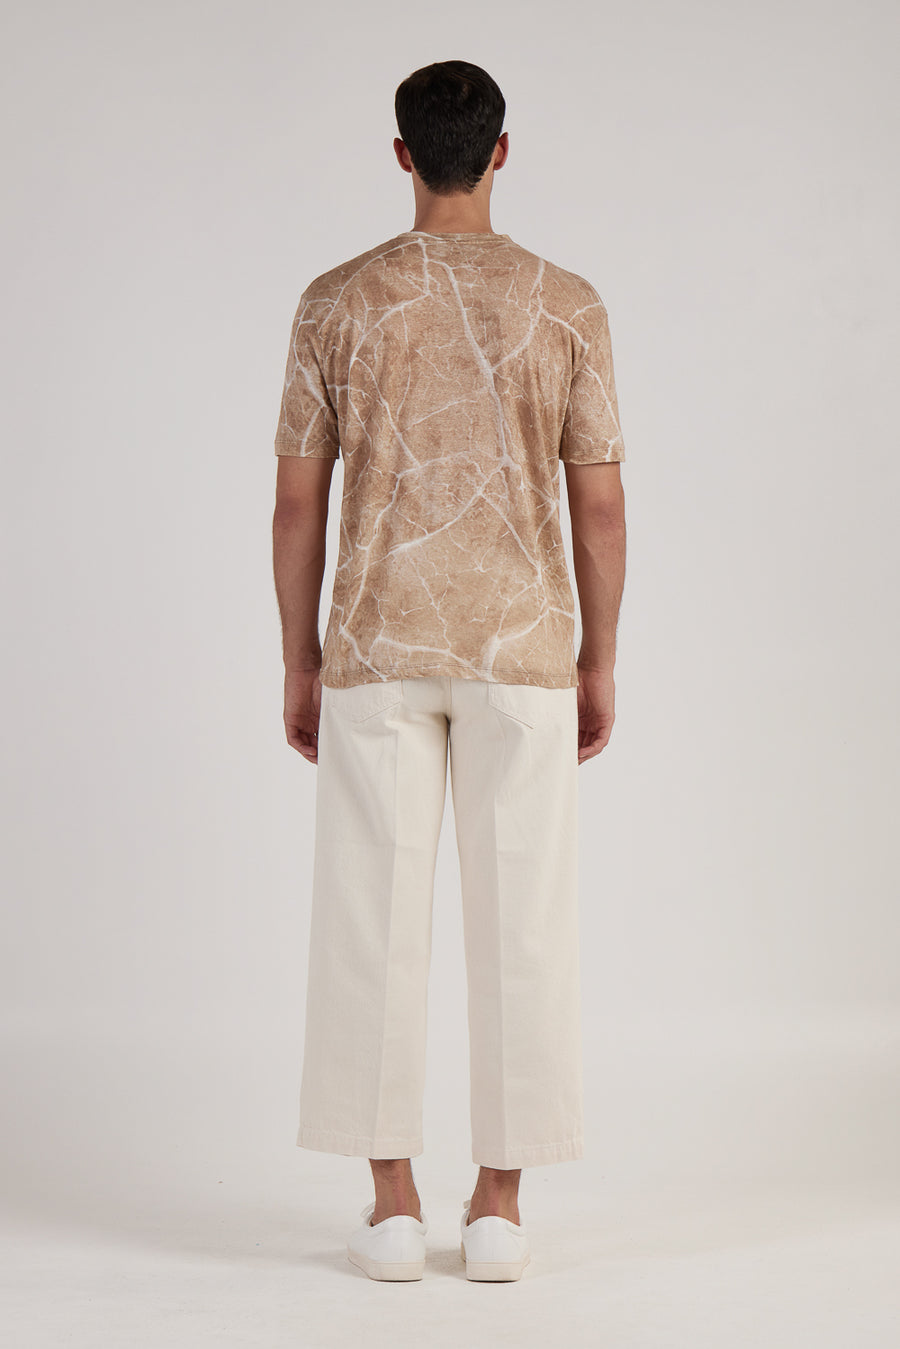 Buy the Daniele Fiesoli Cracking Earth Print Linen T-Shirt in Sand at Intro. Spend £50 for free UK delivery. Official stockists. We ship worldwide.